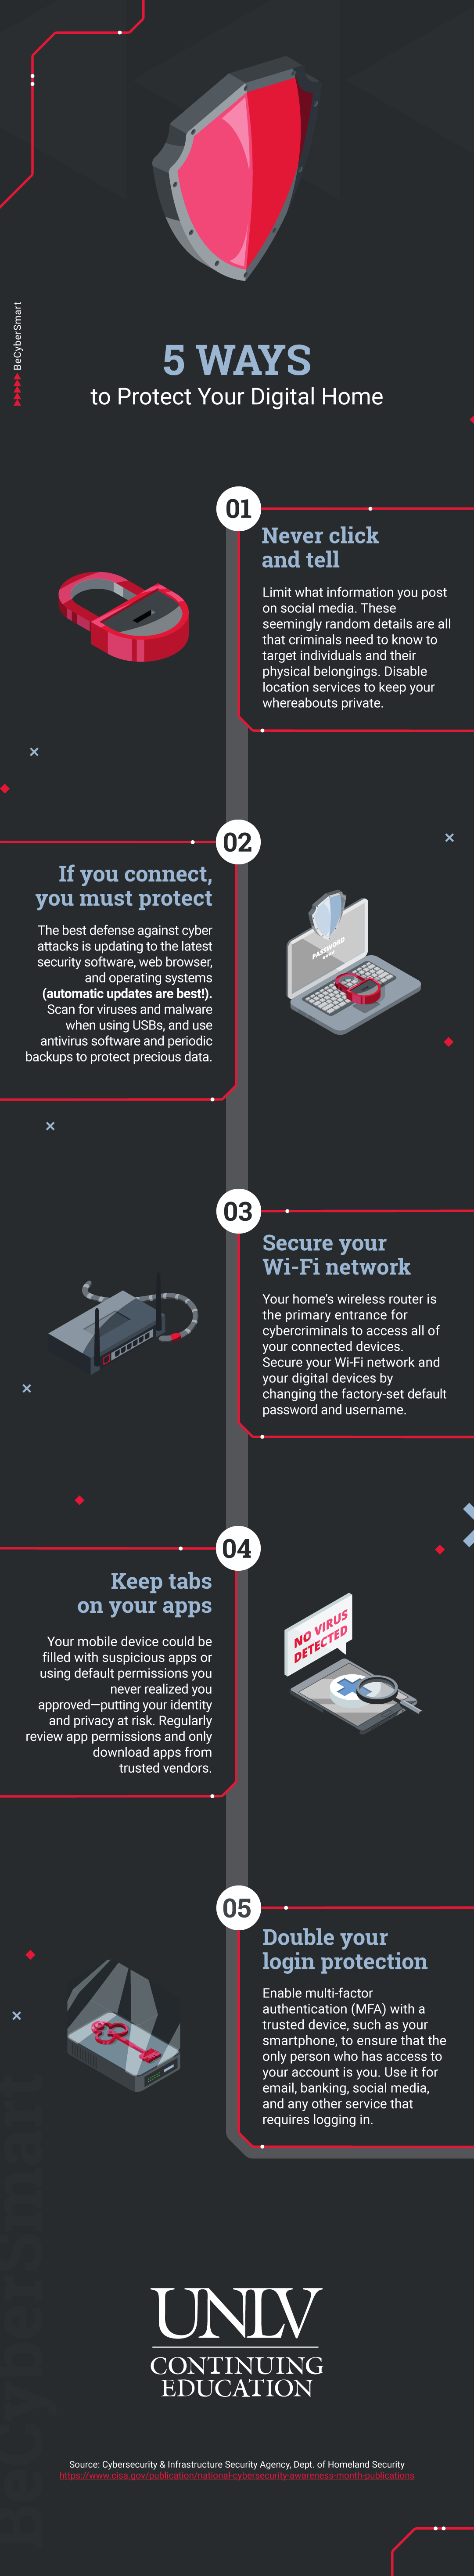 5 ways to protect your digital home infographic